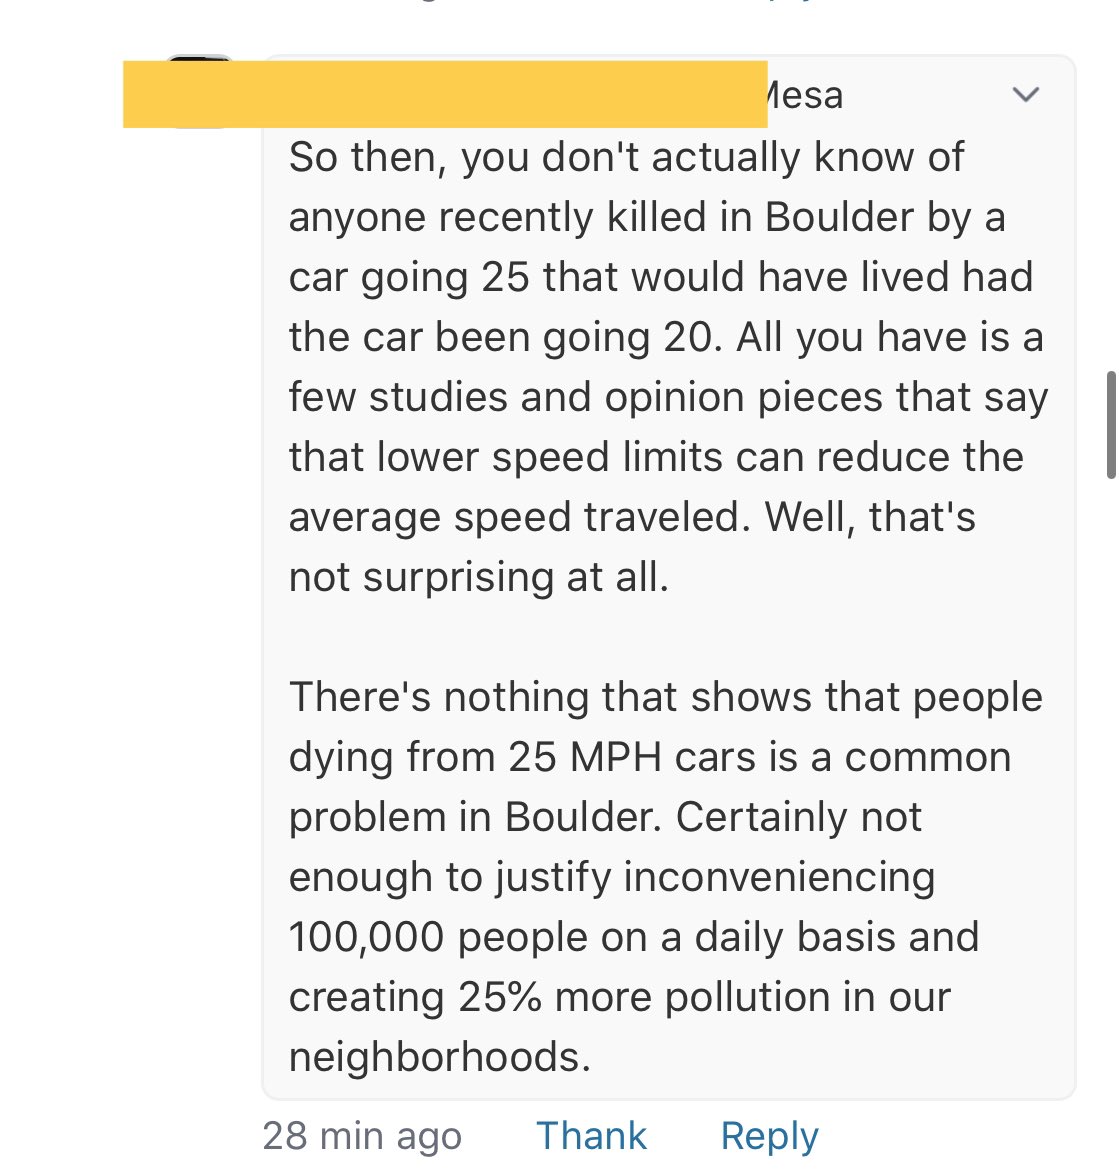 Physics works differently in Boulder, none of those other studies apply to Boulder streets.You shouldn’t inconvenience drivers until X number of people have died.